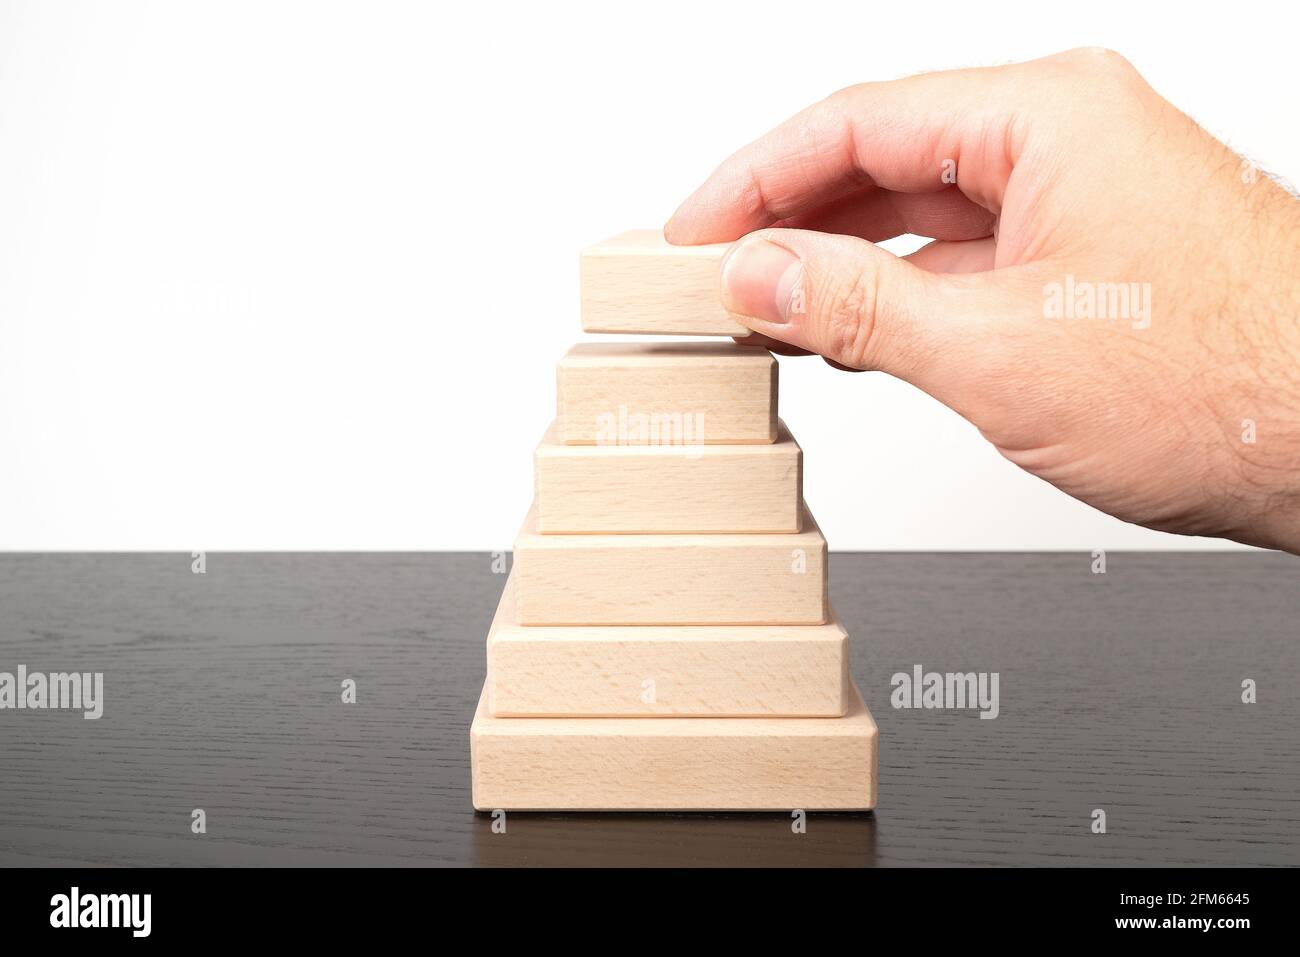 close-up of hand of person stacking wooden blocks forming a pyramid shape Stock Photo